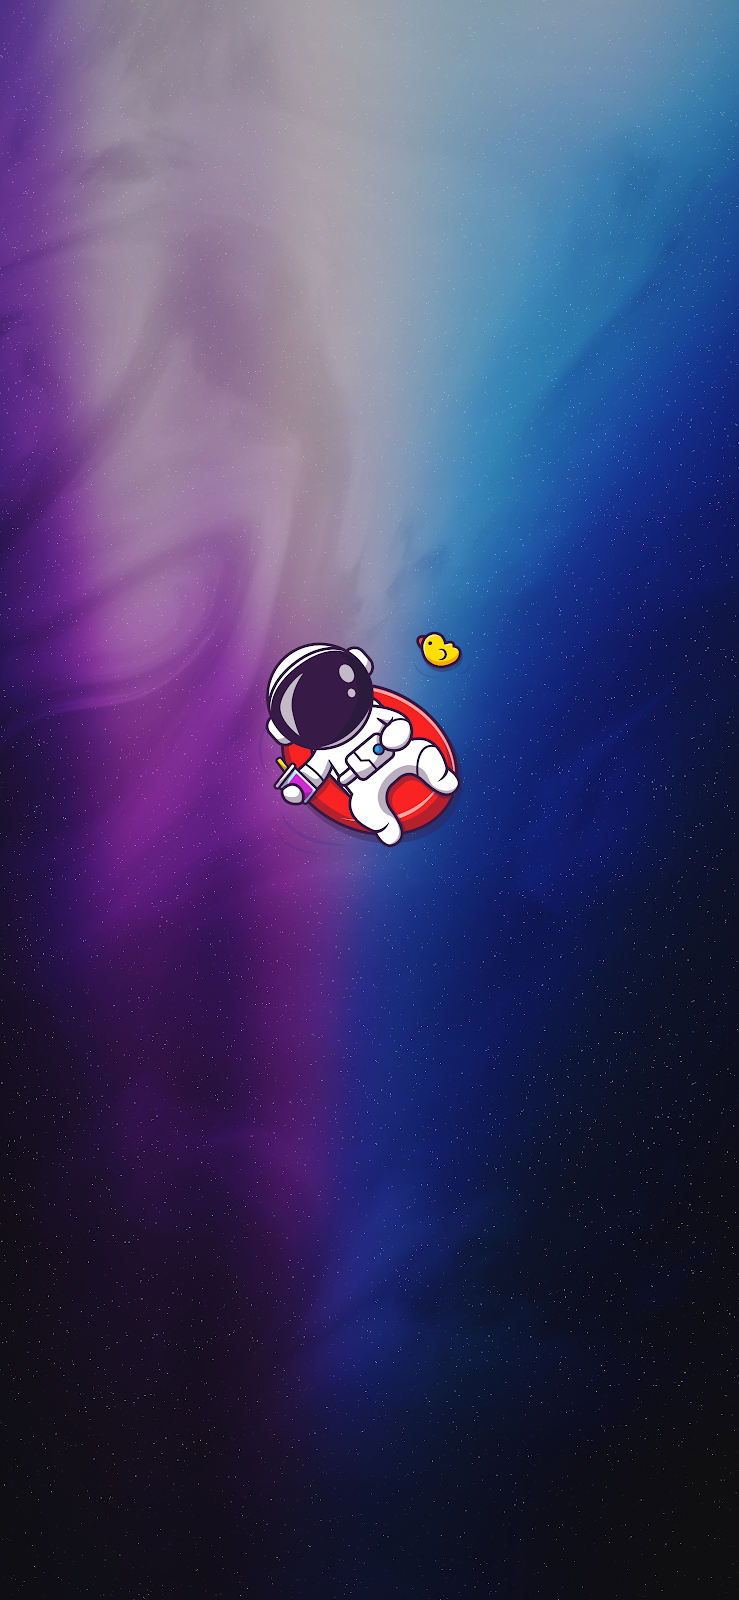 Astronaut Colorful Live Wallpaper - MoeWalls-cheohanoi.vn